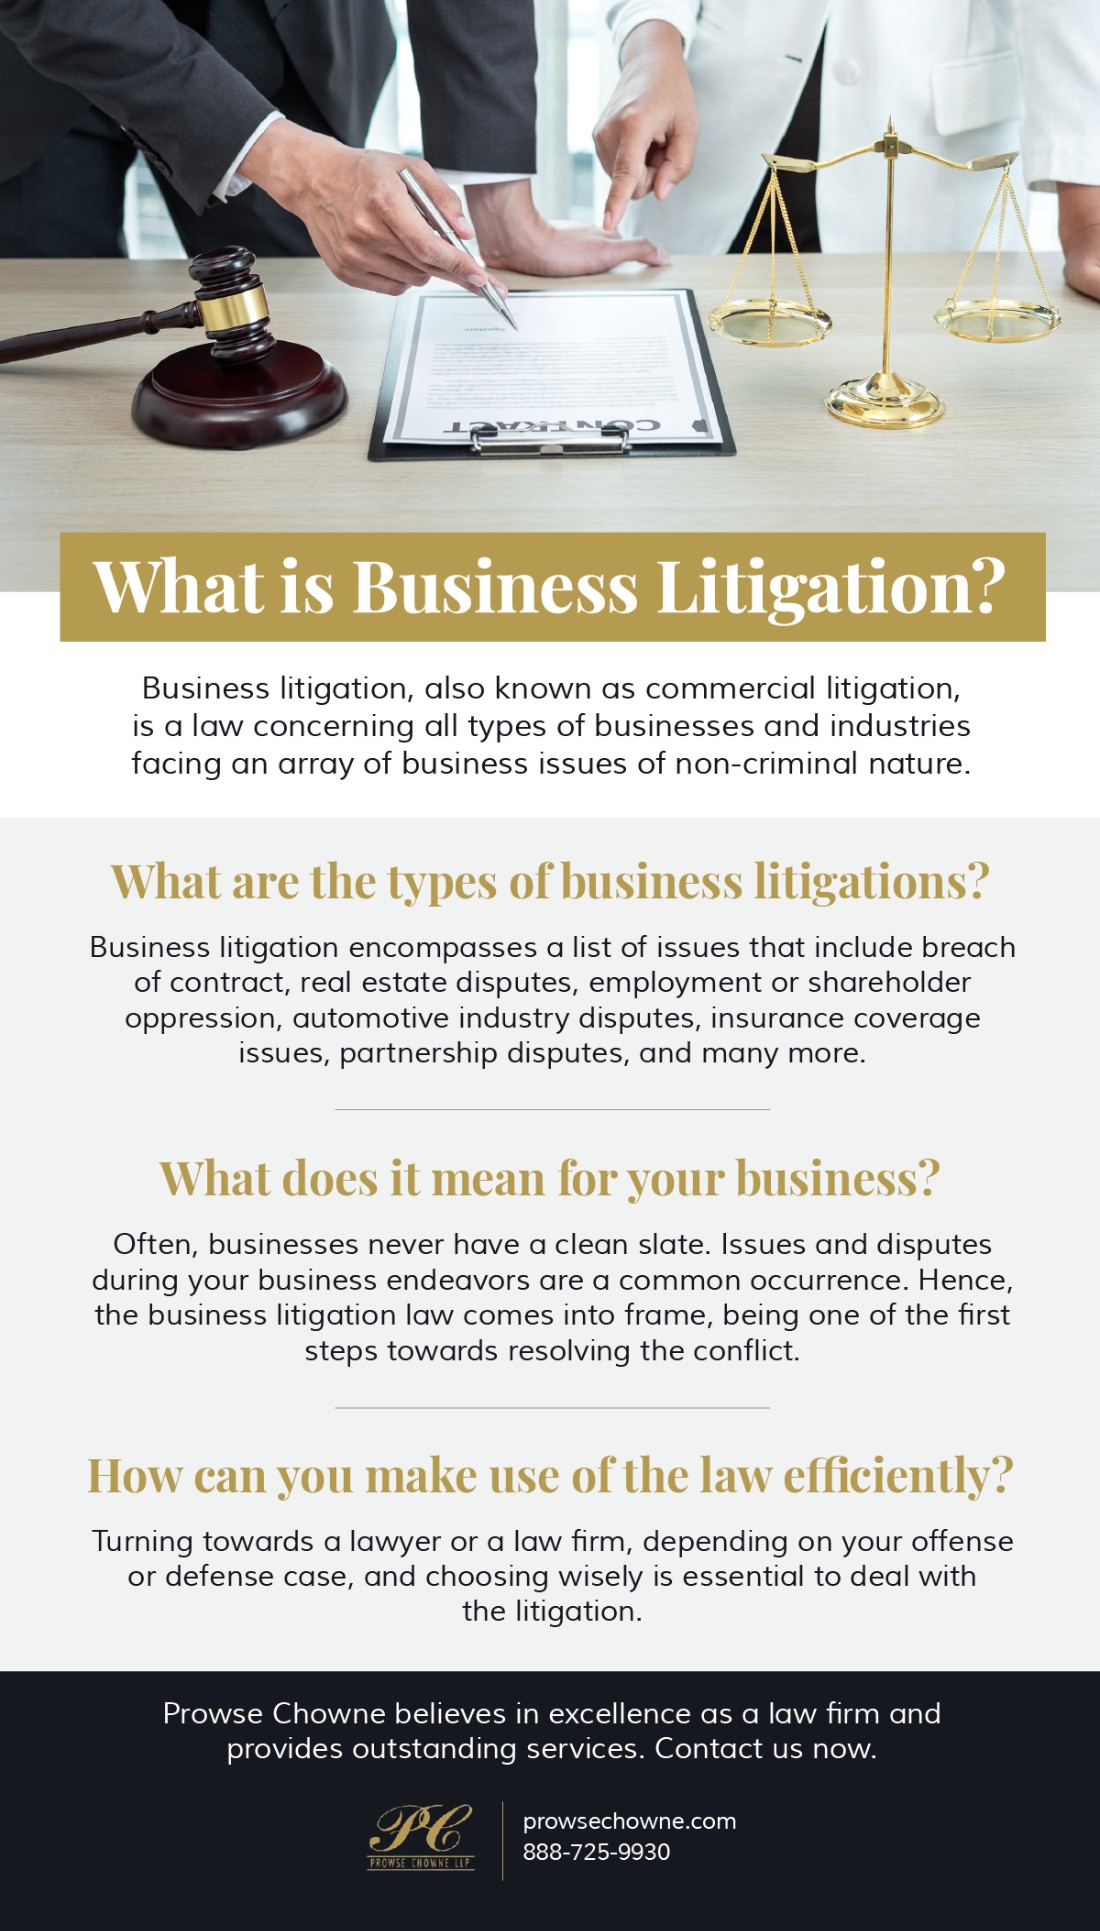 What is Business Litigation